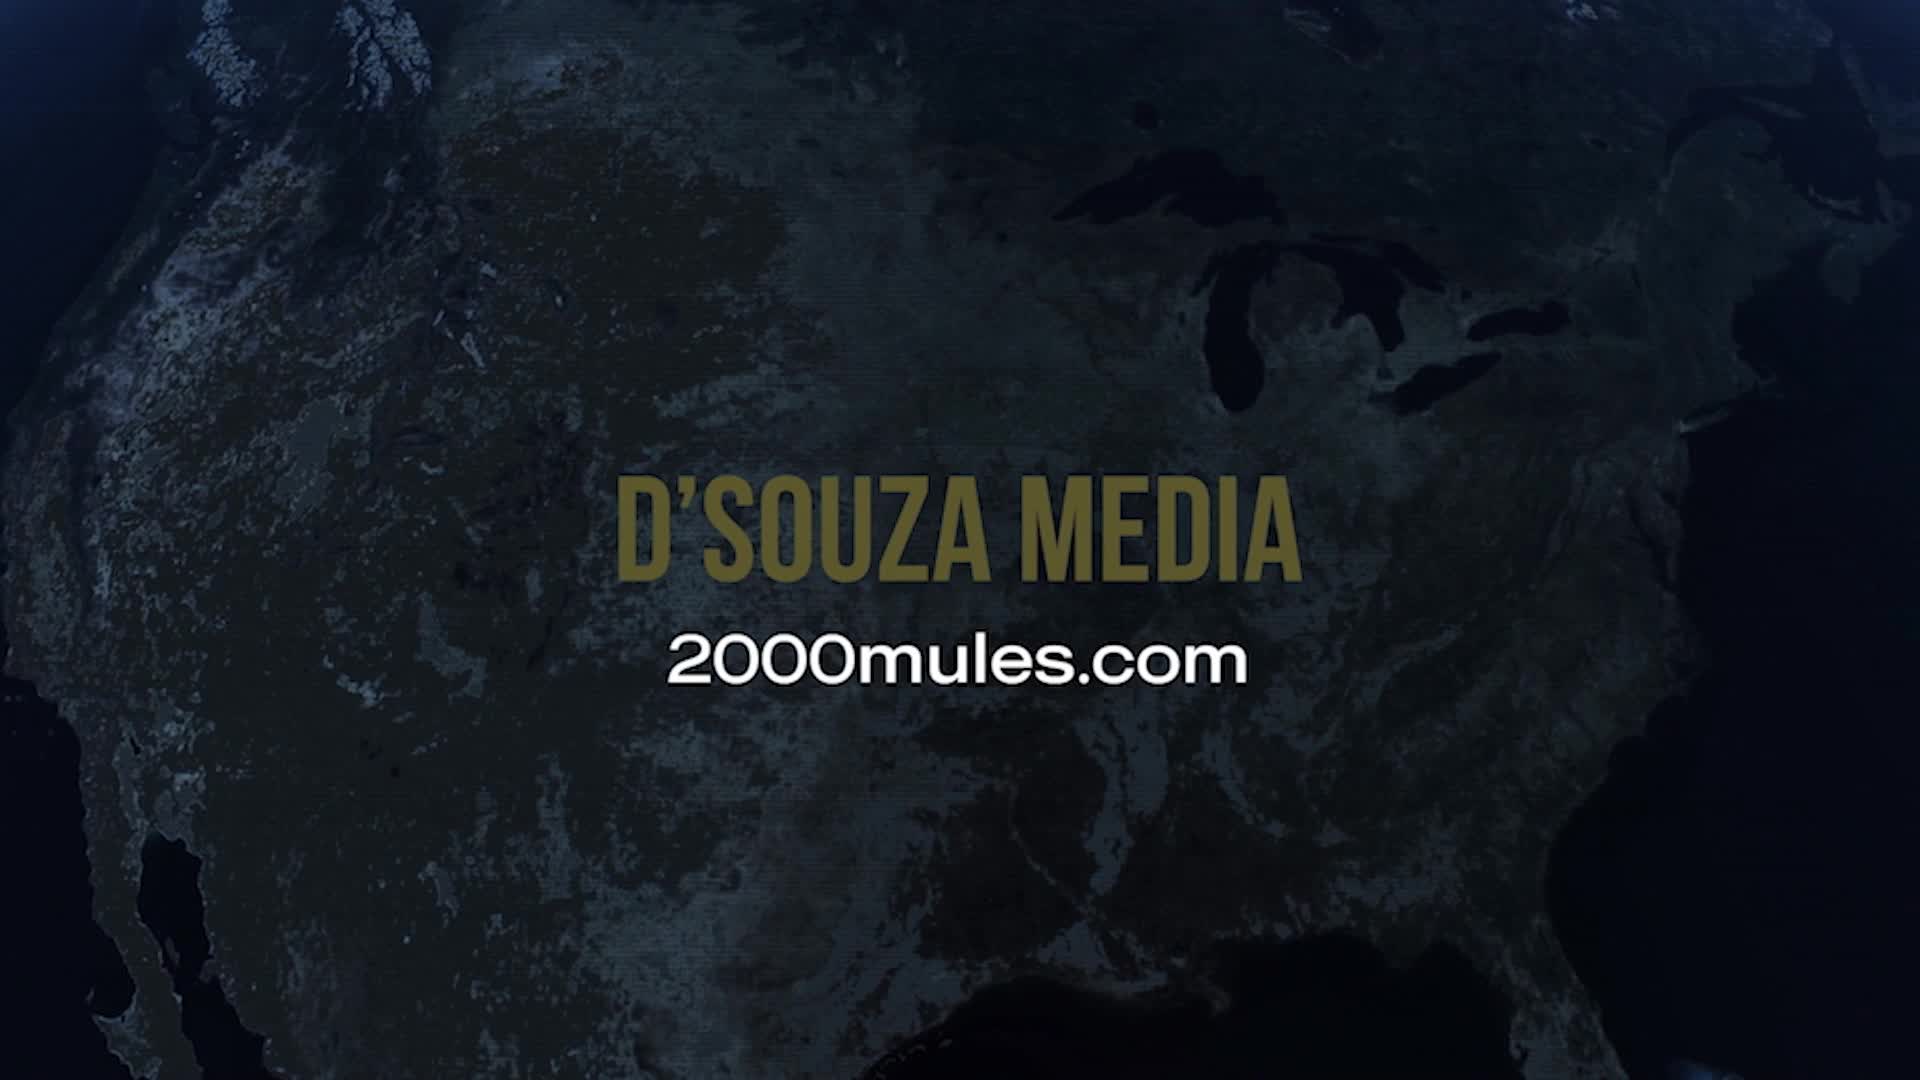 Dinesh D’Souza Releases BOMBSHELL Movie Trailer Revealing “2000 Mules” Who Stole the 2020 Election…EXPLOSIVE New Surveillance Footage of Ballot Drop Boxes